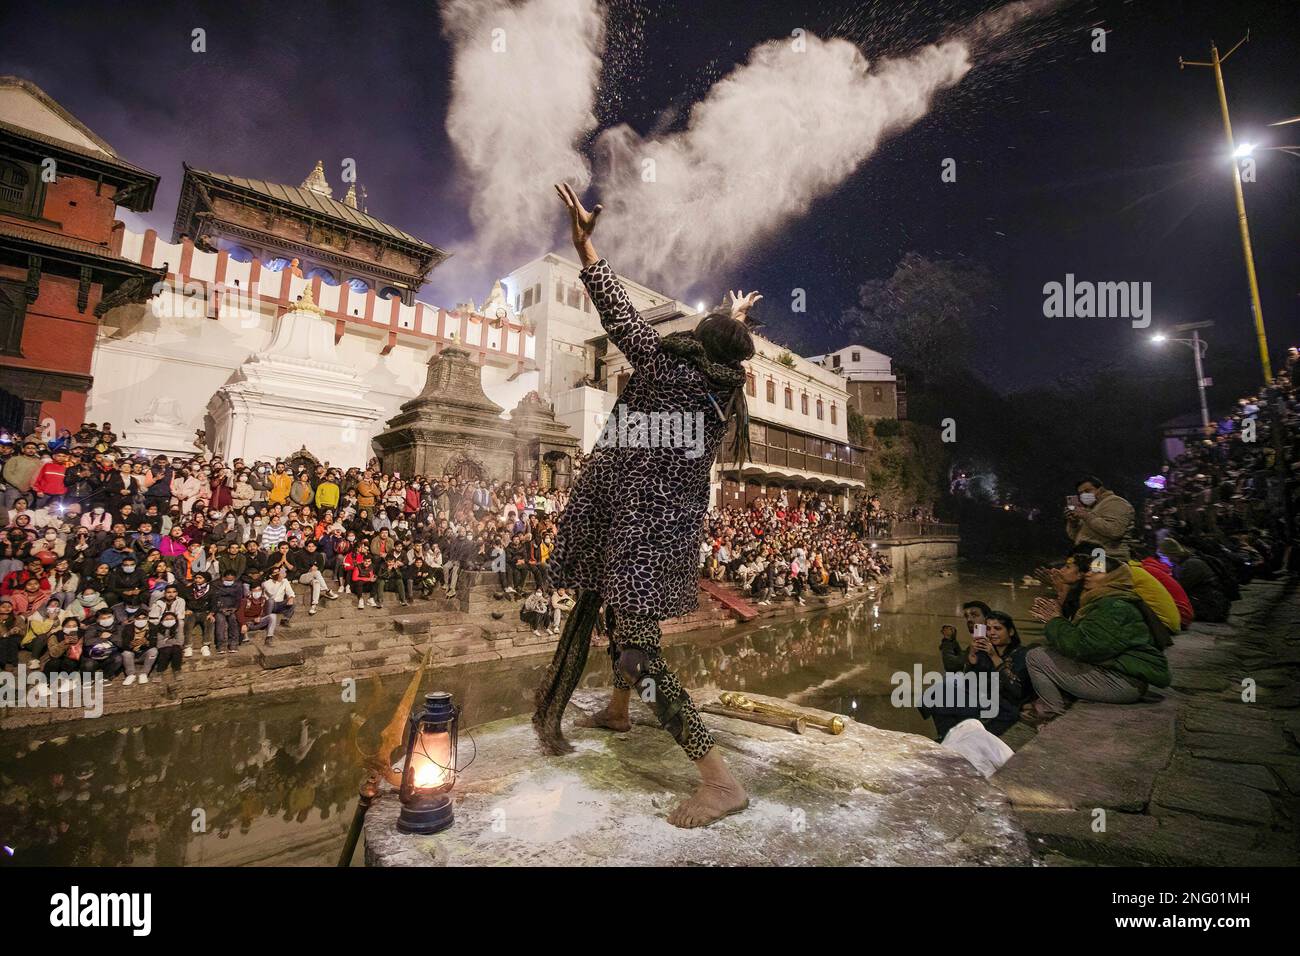 Kathmandu, Nepal. 17th Feb, 2023. A Hindu holy man, or Sadhu, the follower of Lord Shiva, throws ashes as he performs Tandava, a divine dance performed by Deity Shiva, a source of creation, dissolution, and preservation on the eve of the Maha Shivaratri festival at the premises of Pashupatinath Temple in Kathmandu. Hindu Devotees from Nepal and India come to this temple to take part in the Shivaratri festival which is one of the biggest Hindu festivals dedicated to Lord Shiva and celebrated by devotees all over the world. Credit: SOPA Images Limited/Alamy Live News Stock Photo